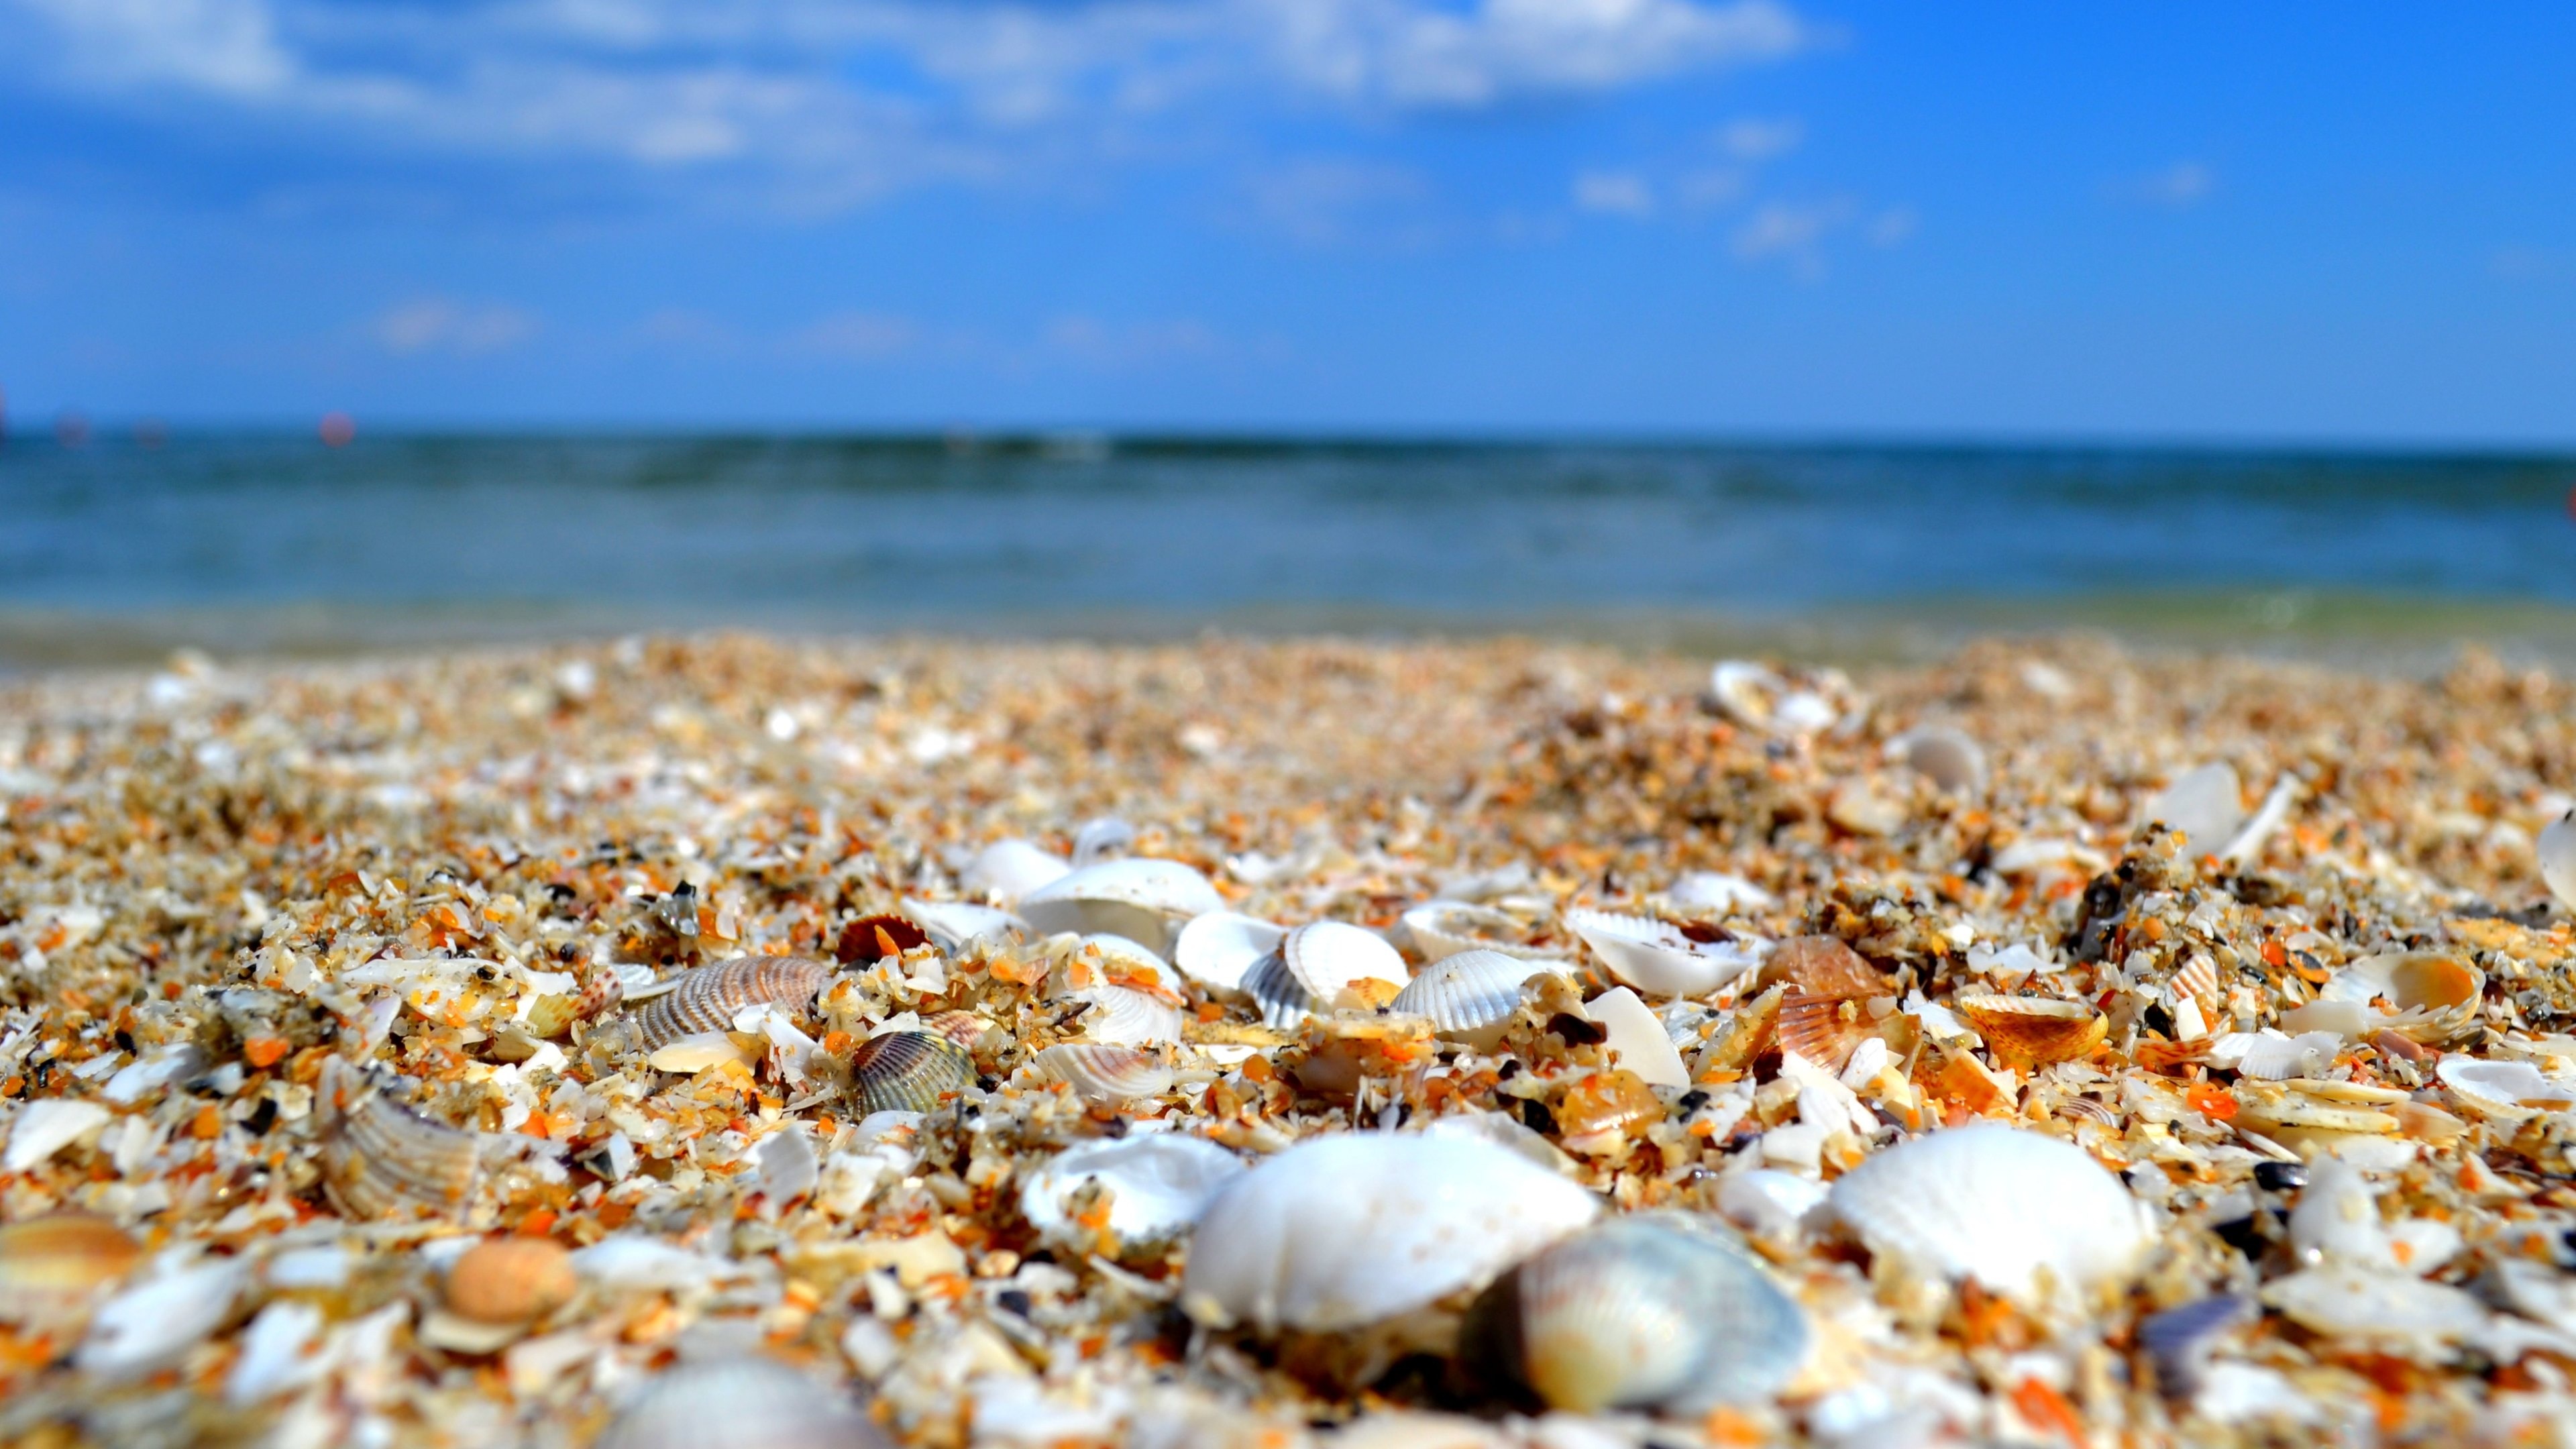 Sea Shell: Are often washed up onto a beach empty and clean. 3840x2160 4K Background.